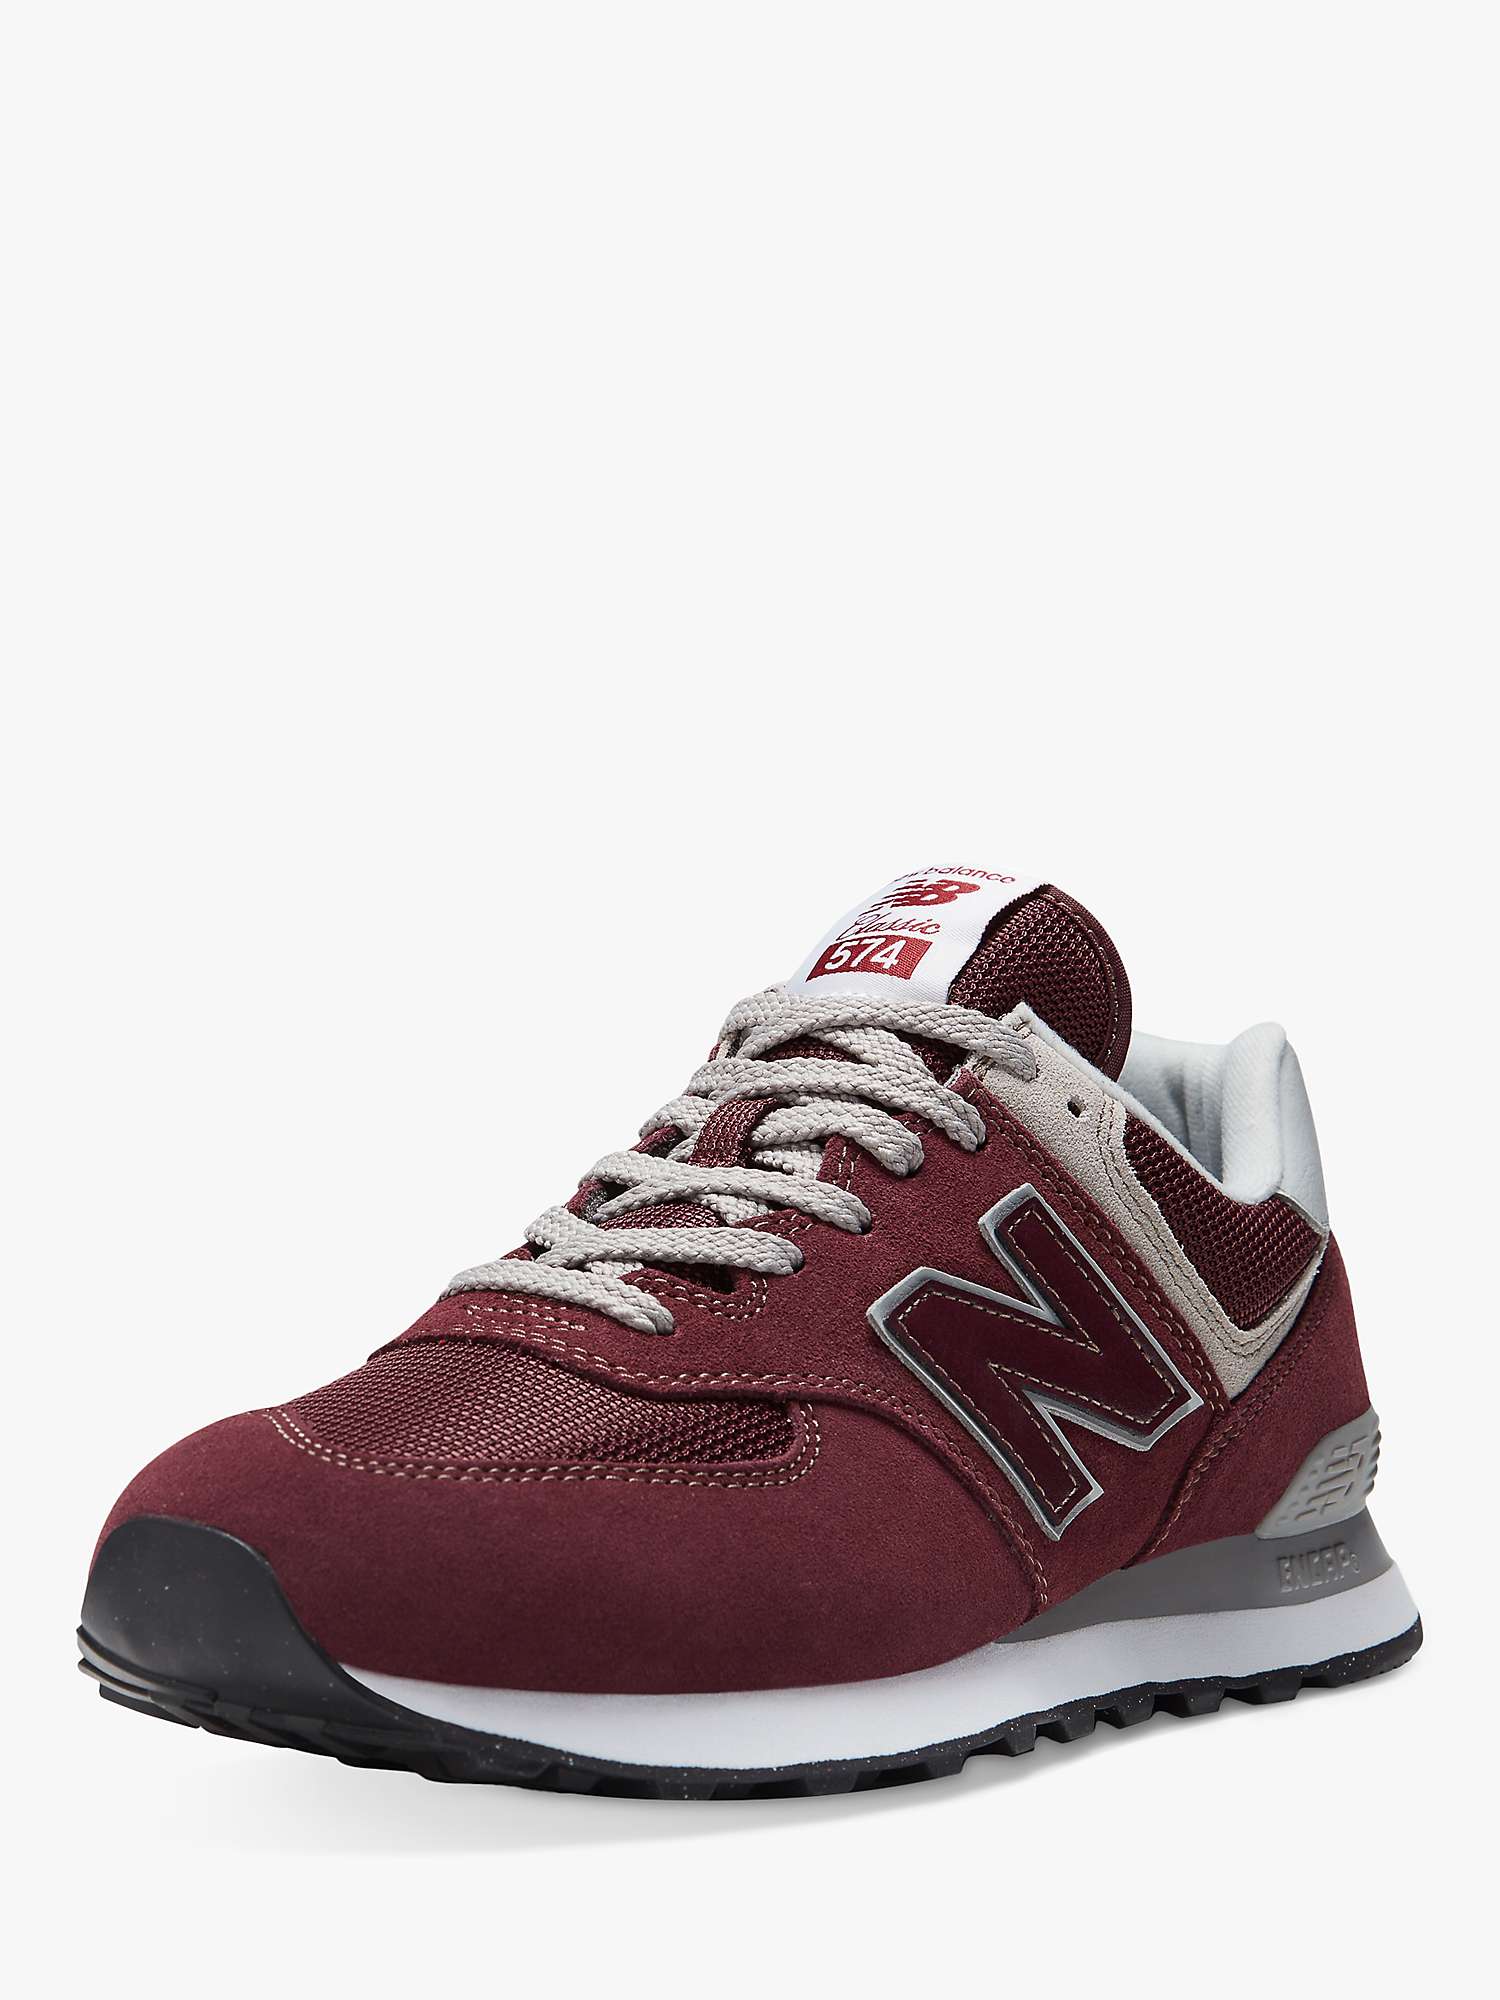 New Balance 574 Suede Trainers, Red At John Lewis & Partners